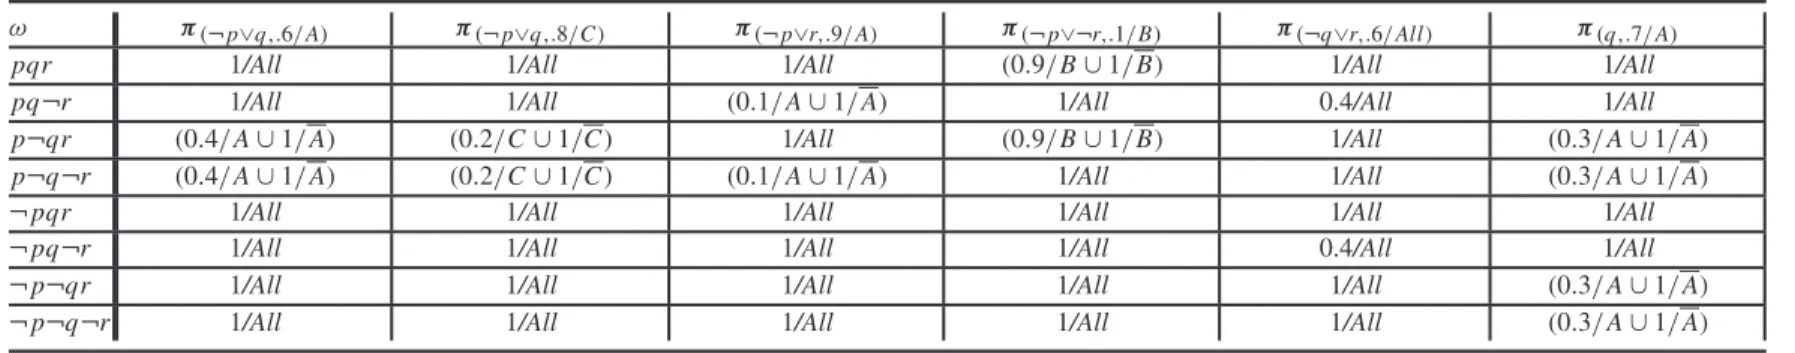 Table 3. Detailed computation of the ma-5-distribution in the example, part 1.